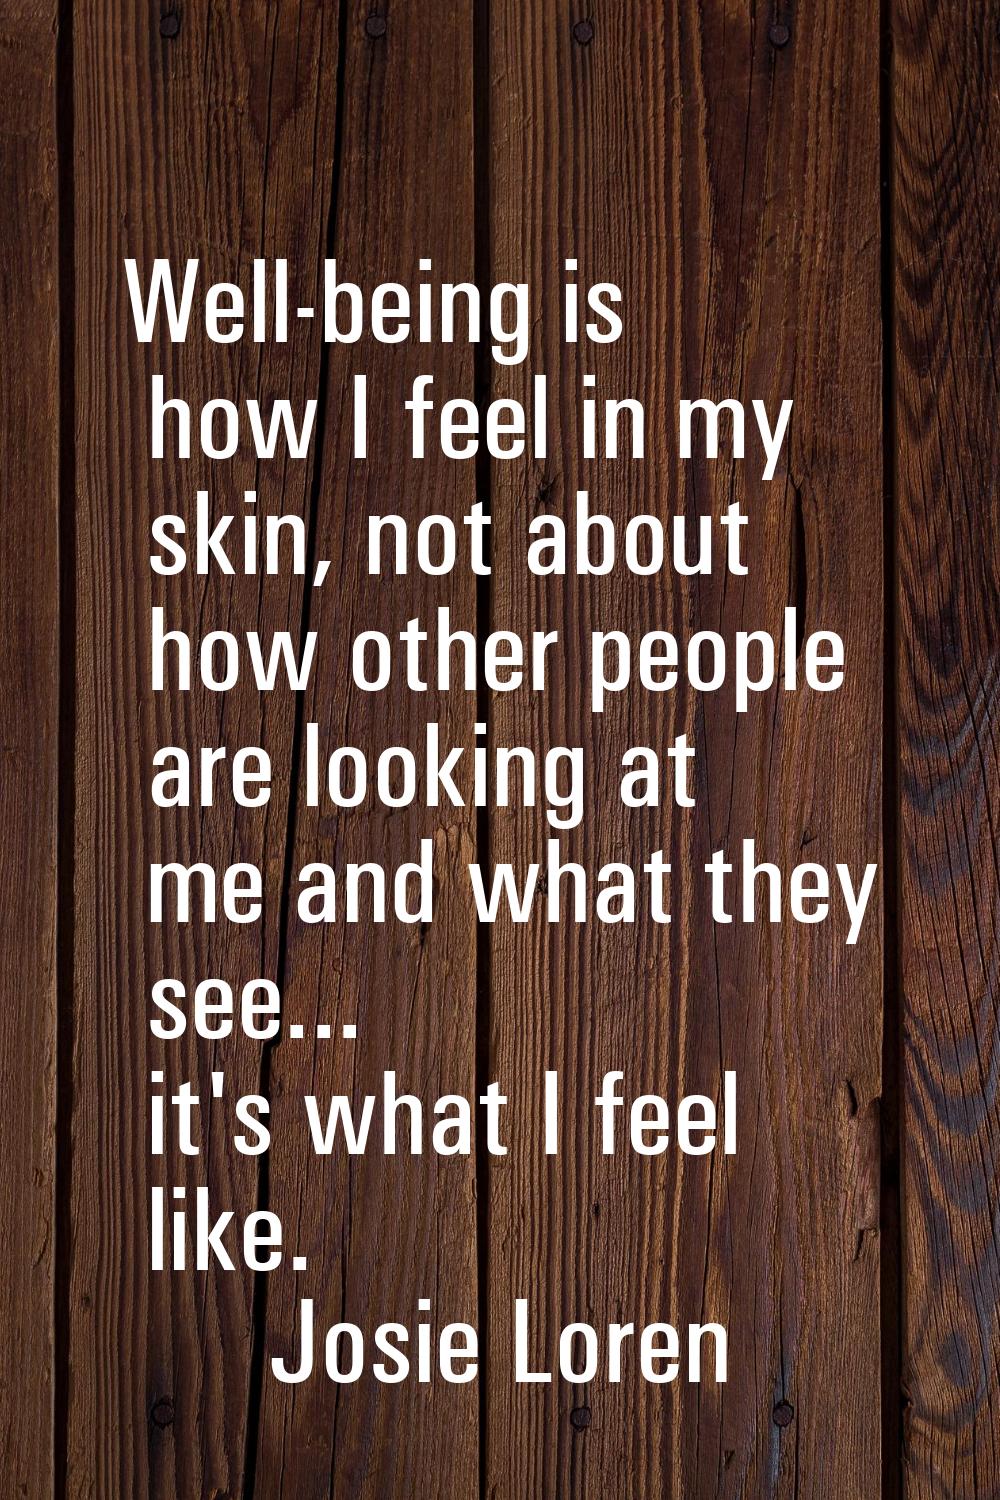 Well-being is how I feel in my skin, not about how other people are looking at me and what they see